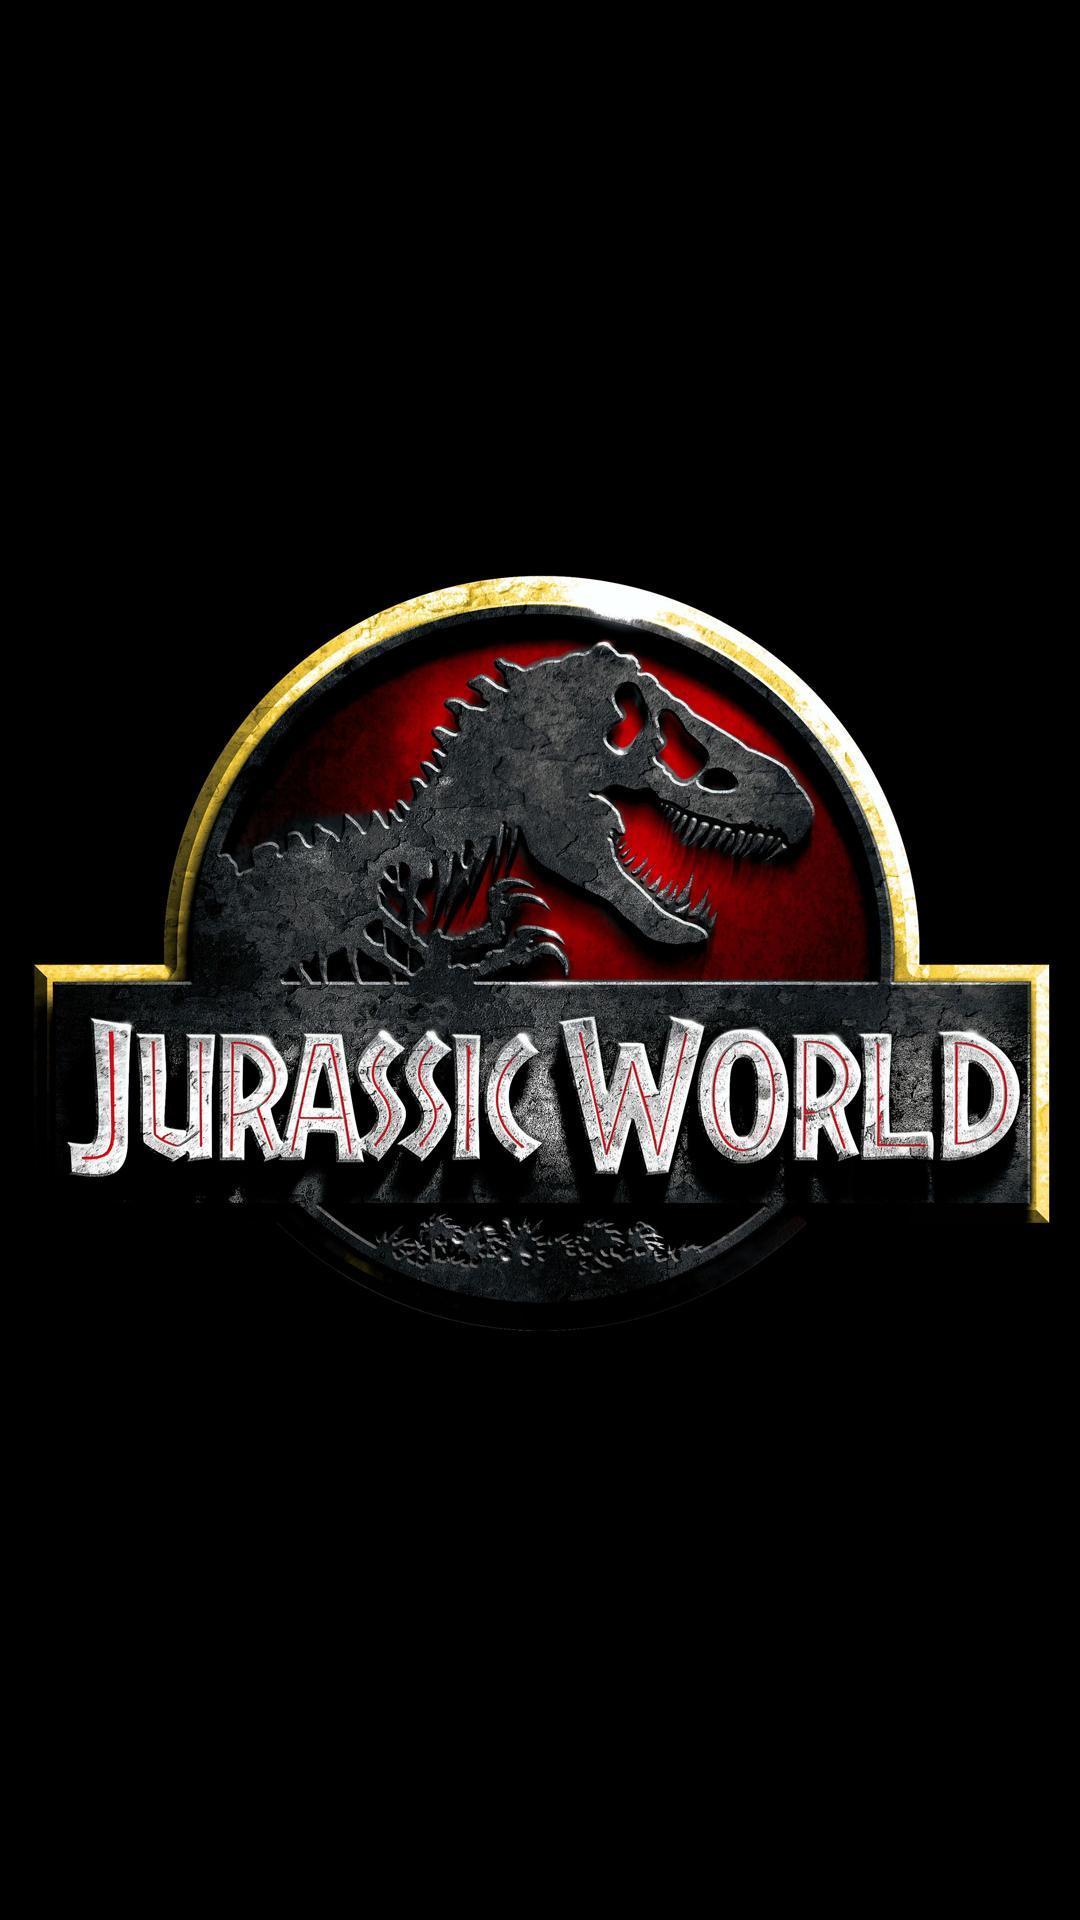 Jurassic World Wallpaper for Android